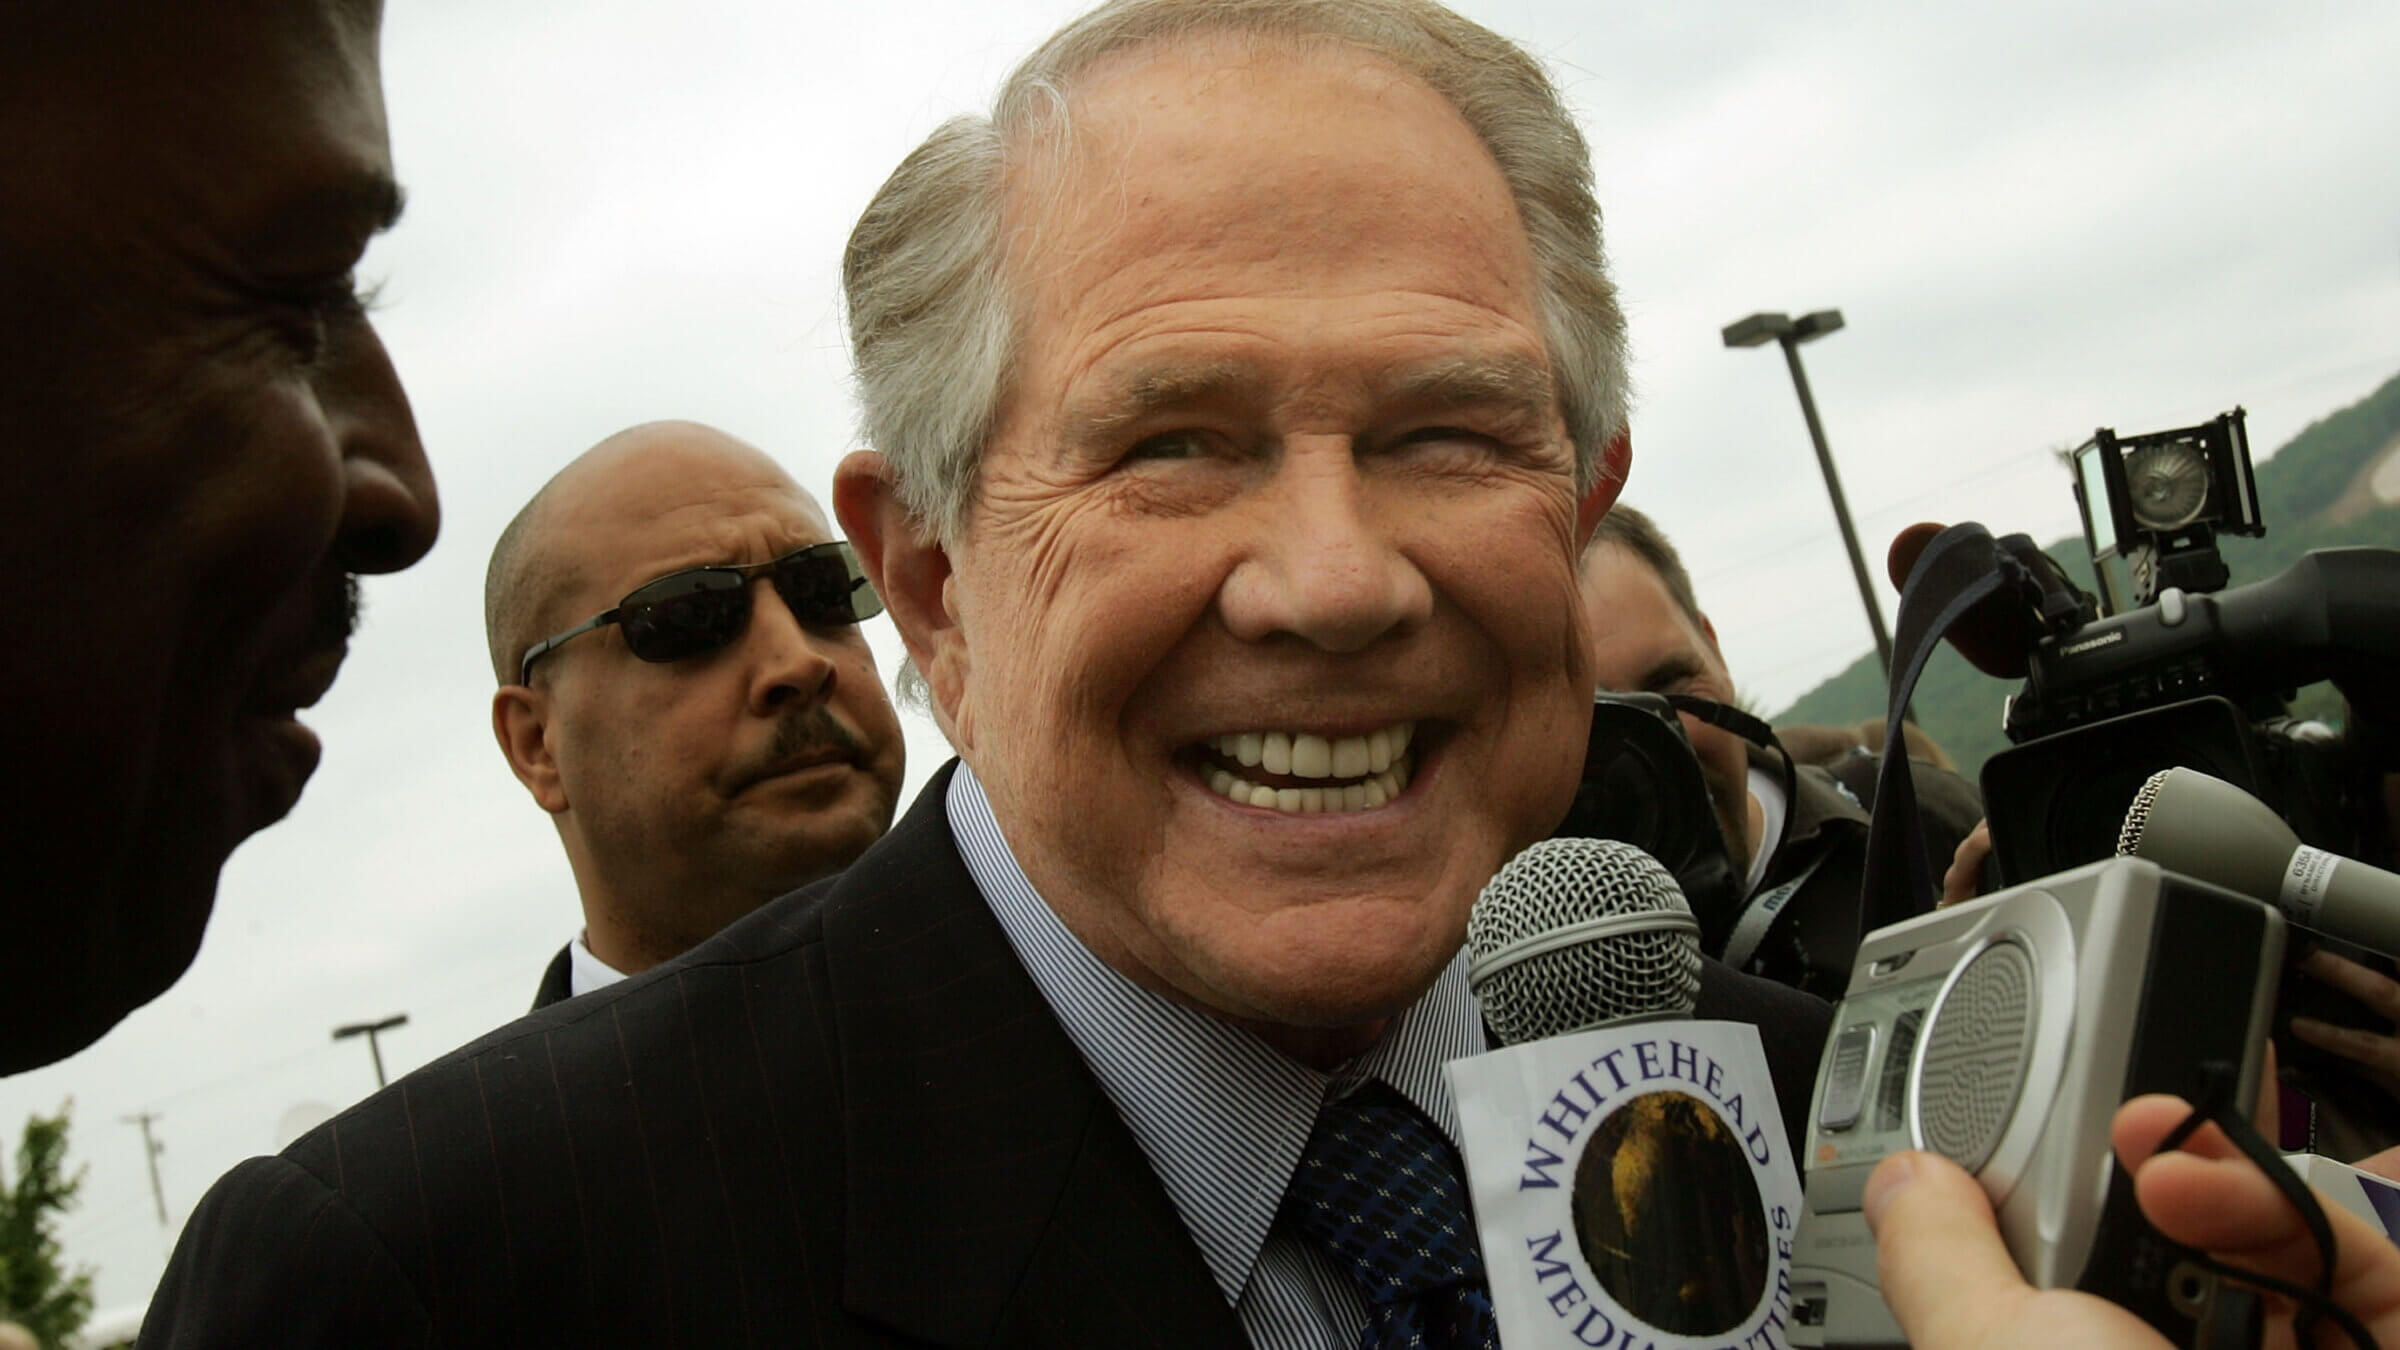 Pat Robertson at Jerry Falwell's funeral, 2007